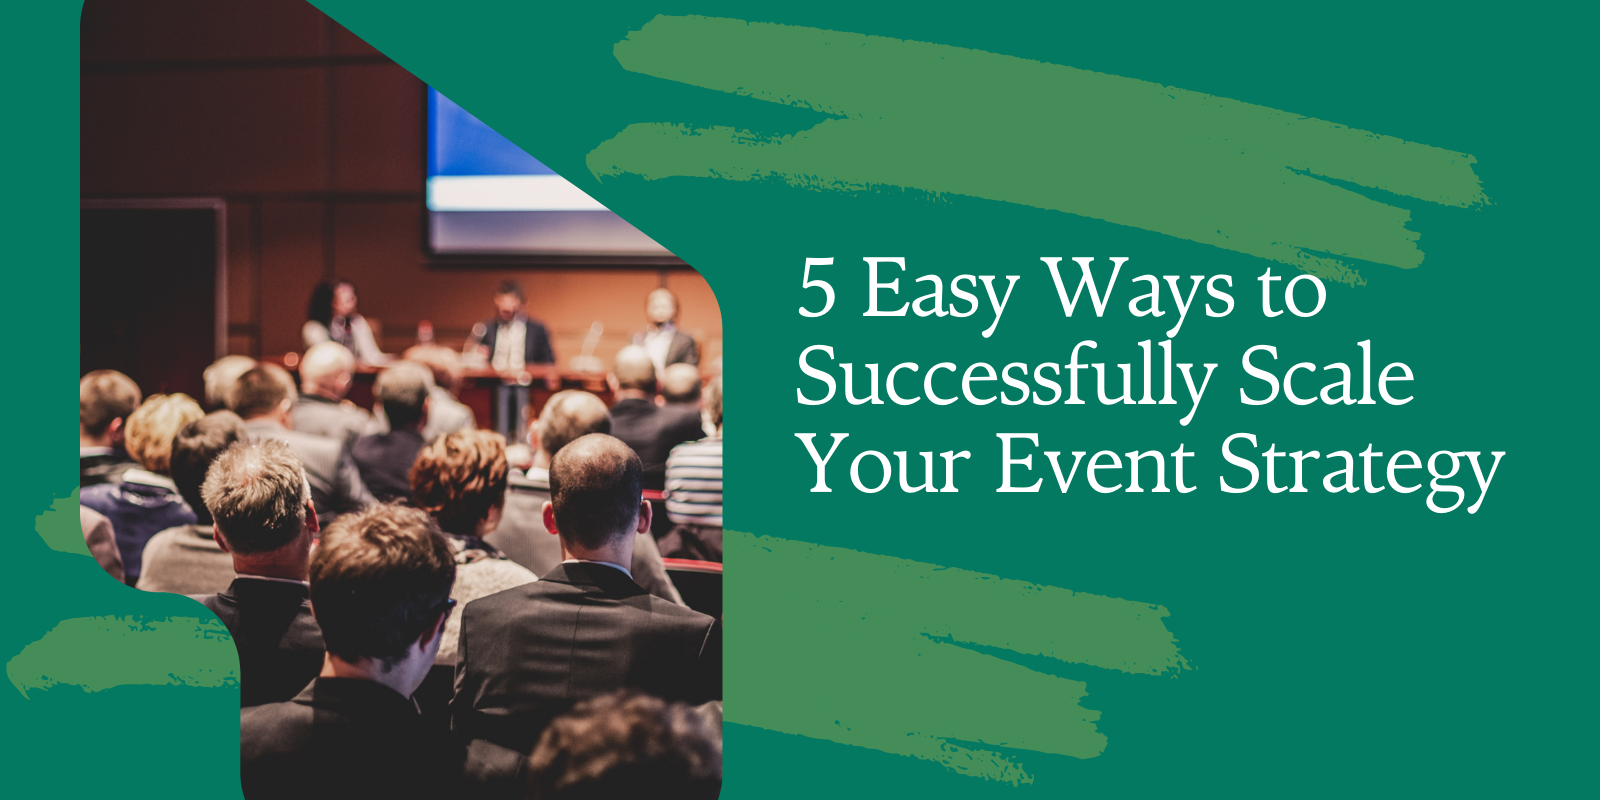 5 Easy Ways to Successfully Scale Your Event Strategy